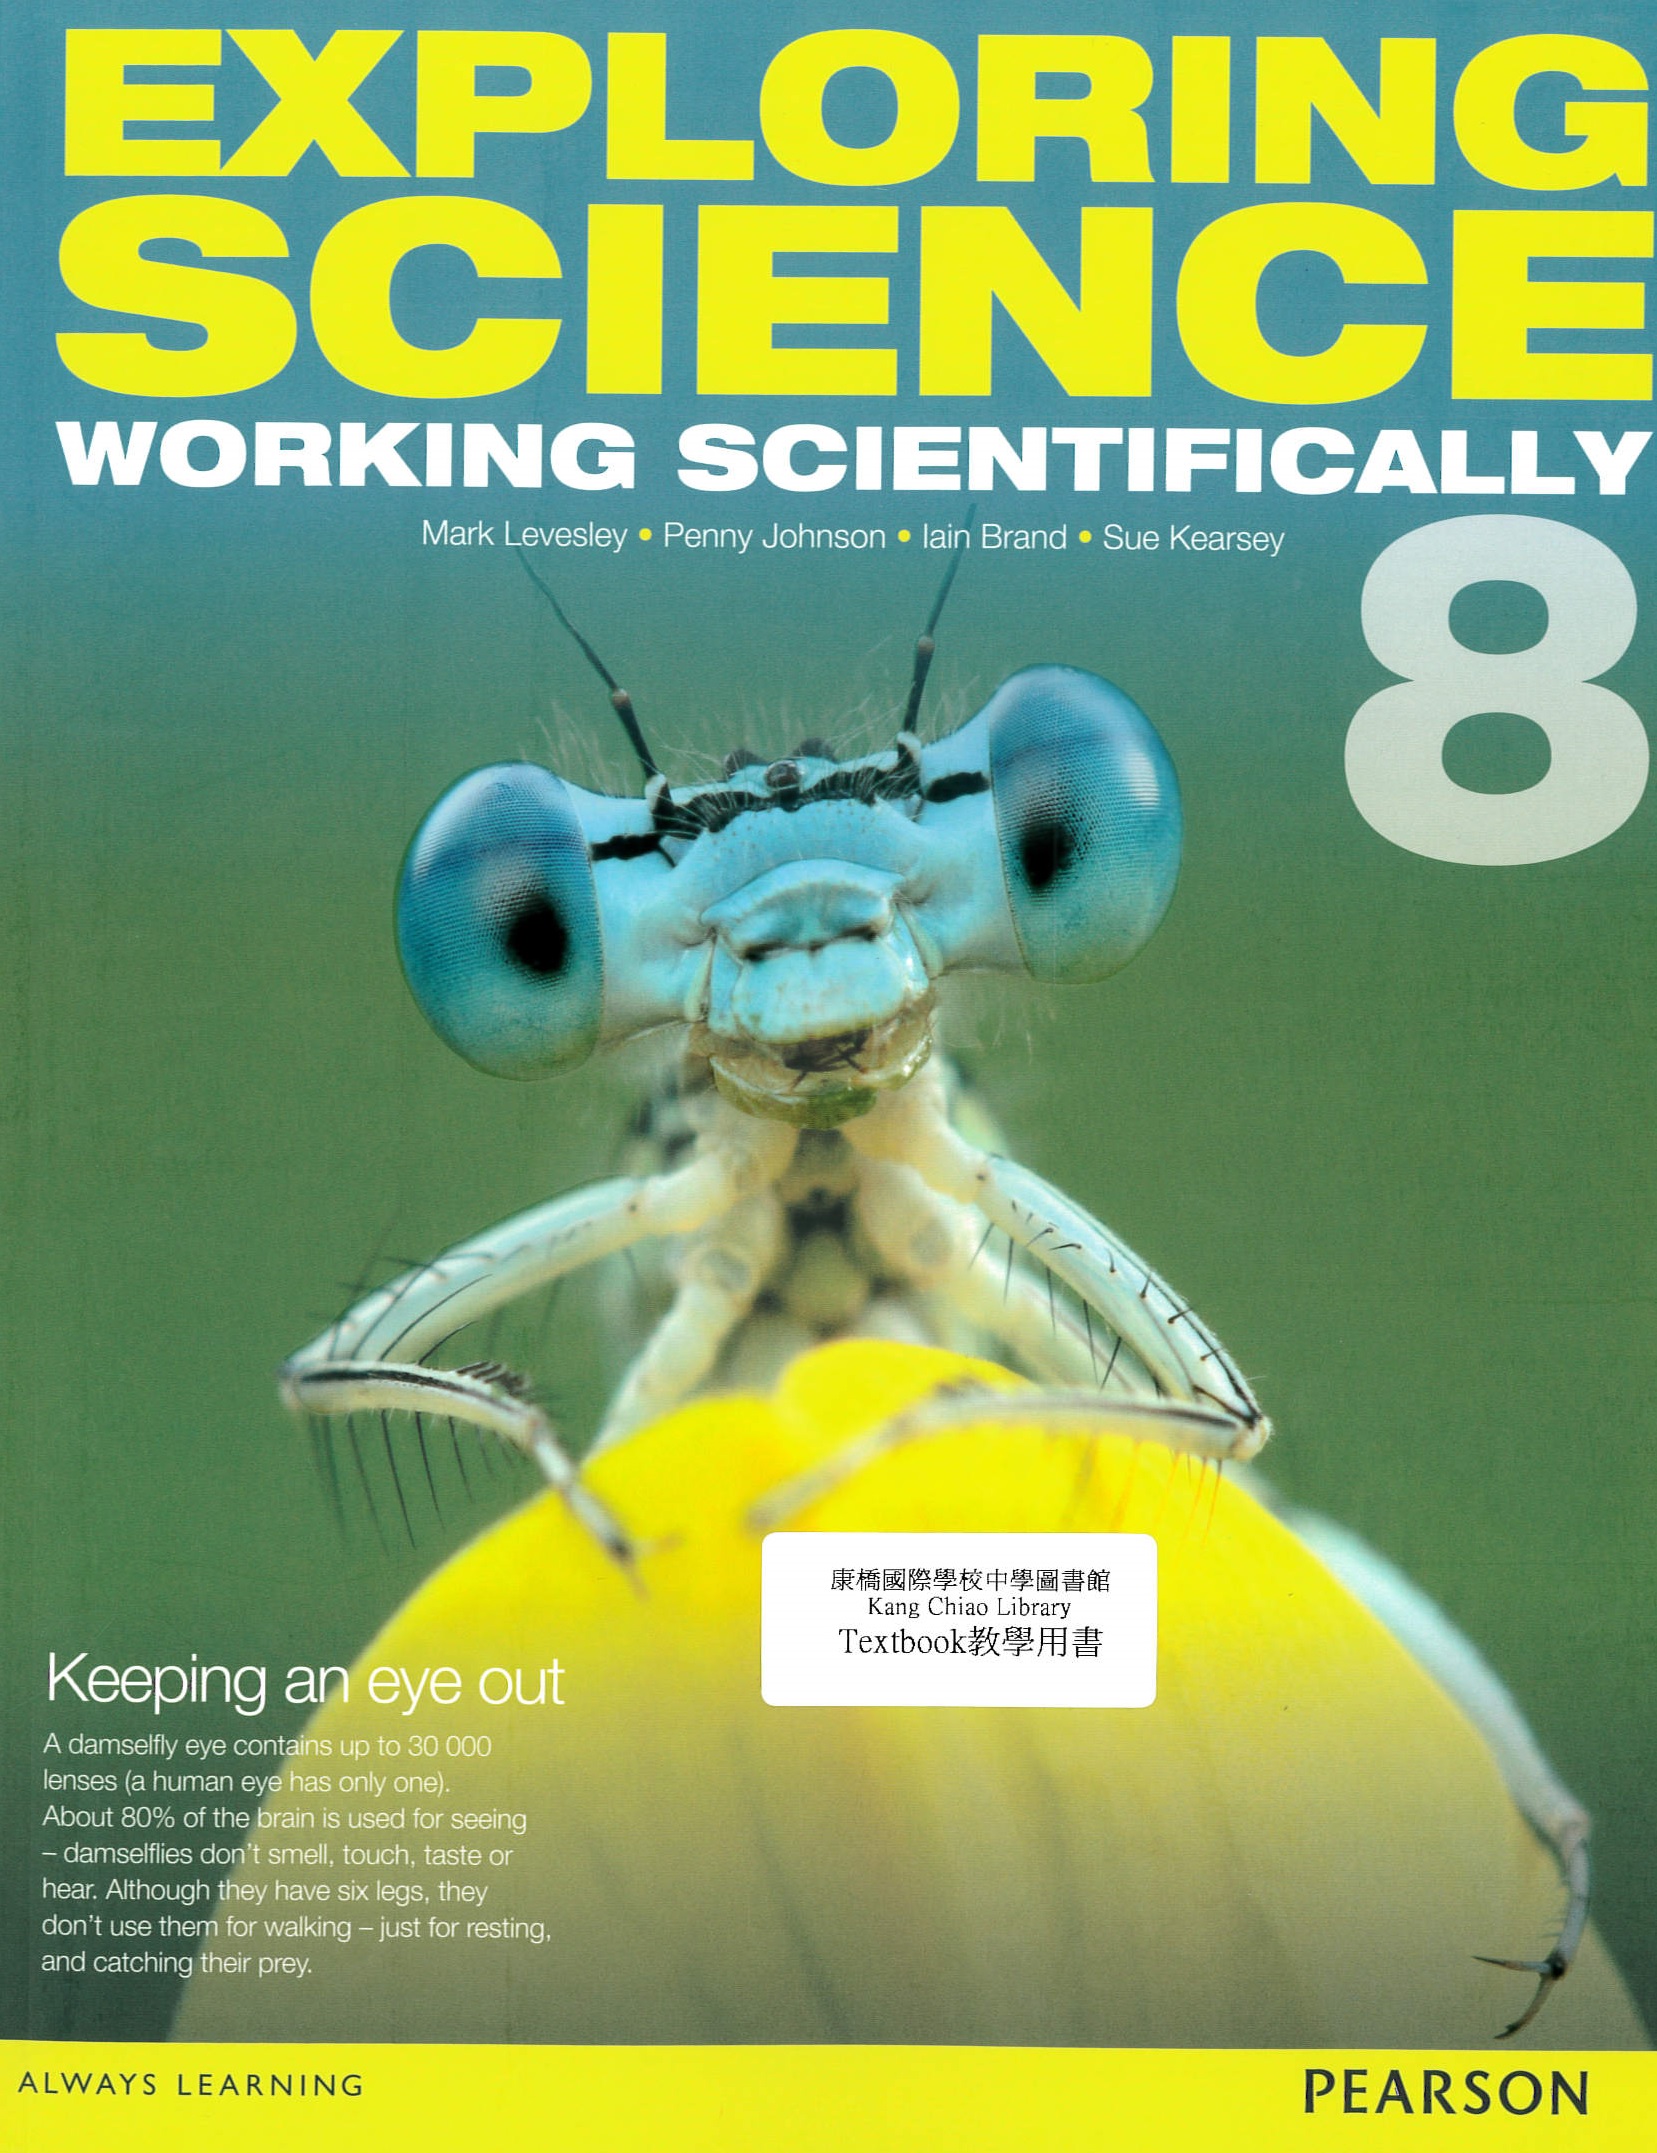 Exploring science : working scientifically(8) [Student book]